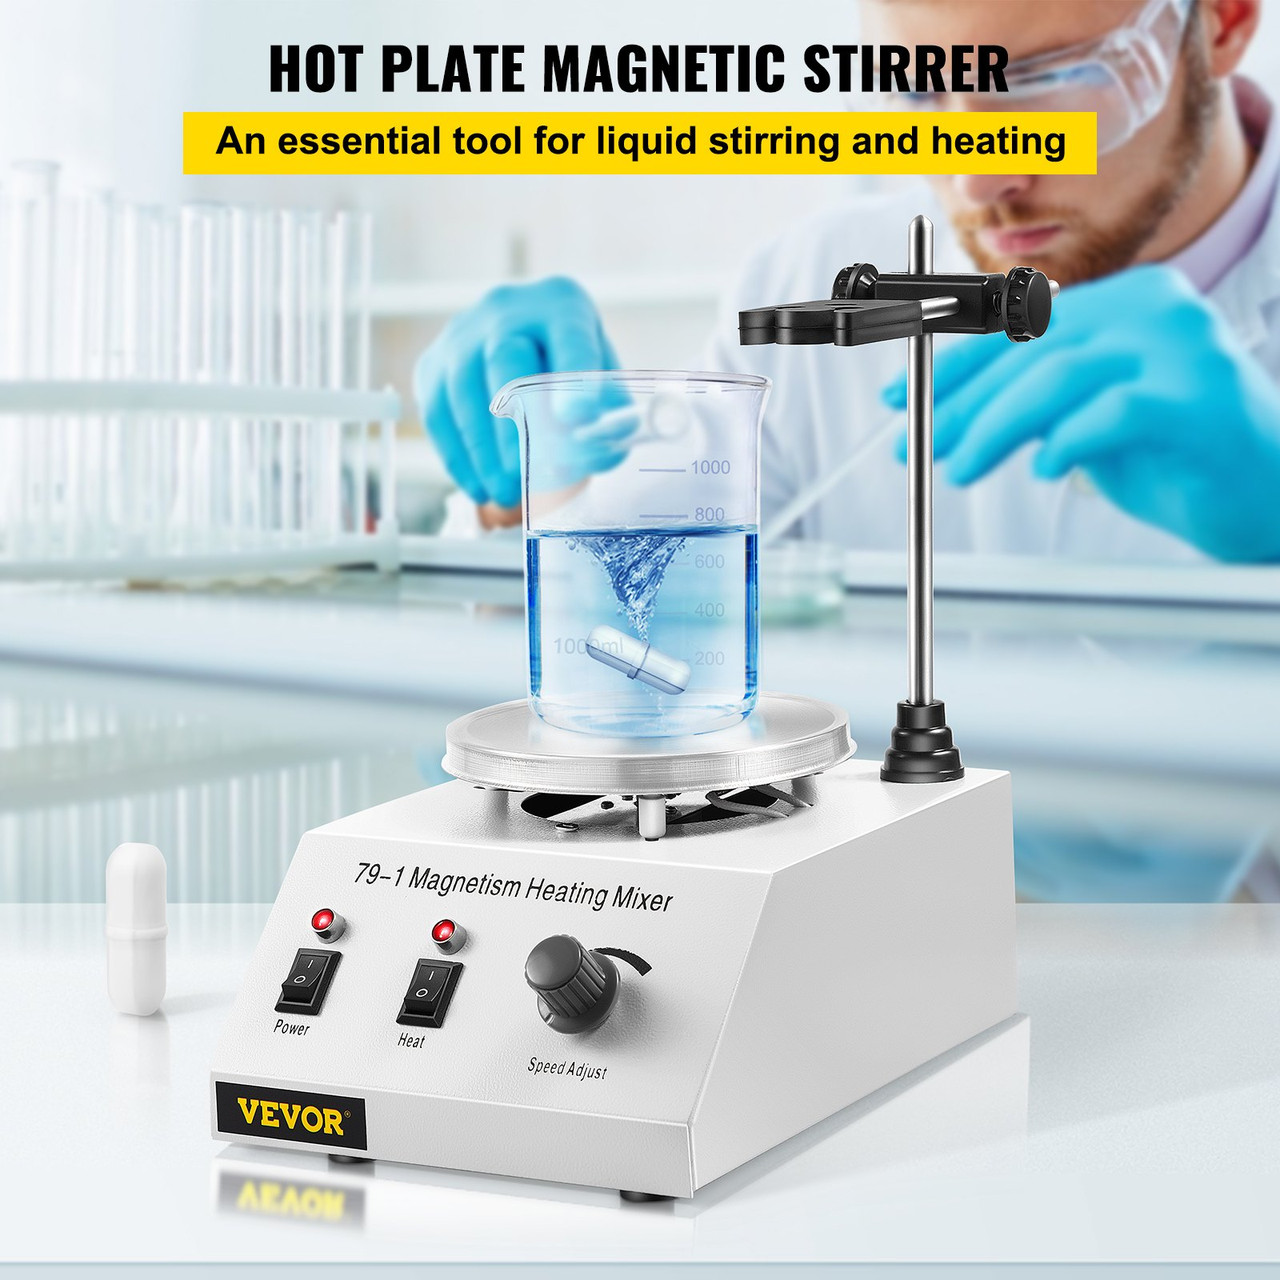 Magnetic Stirrer 250W 158?/70? Heating Hot Plate with Magnetic Stirrer 0-1600 RPM Adjustable 1000ML Lab Magnetic Stirrer Mixer with Stand Support, Stirring Bar